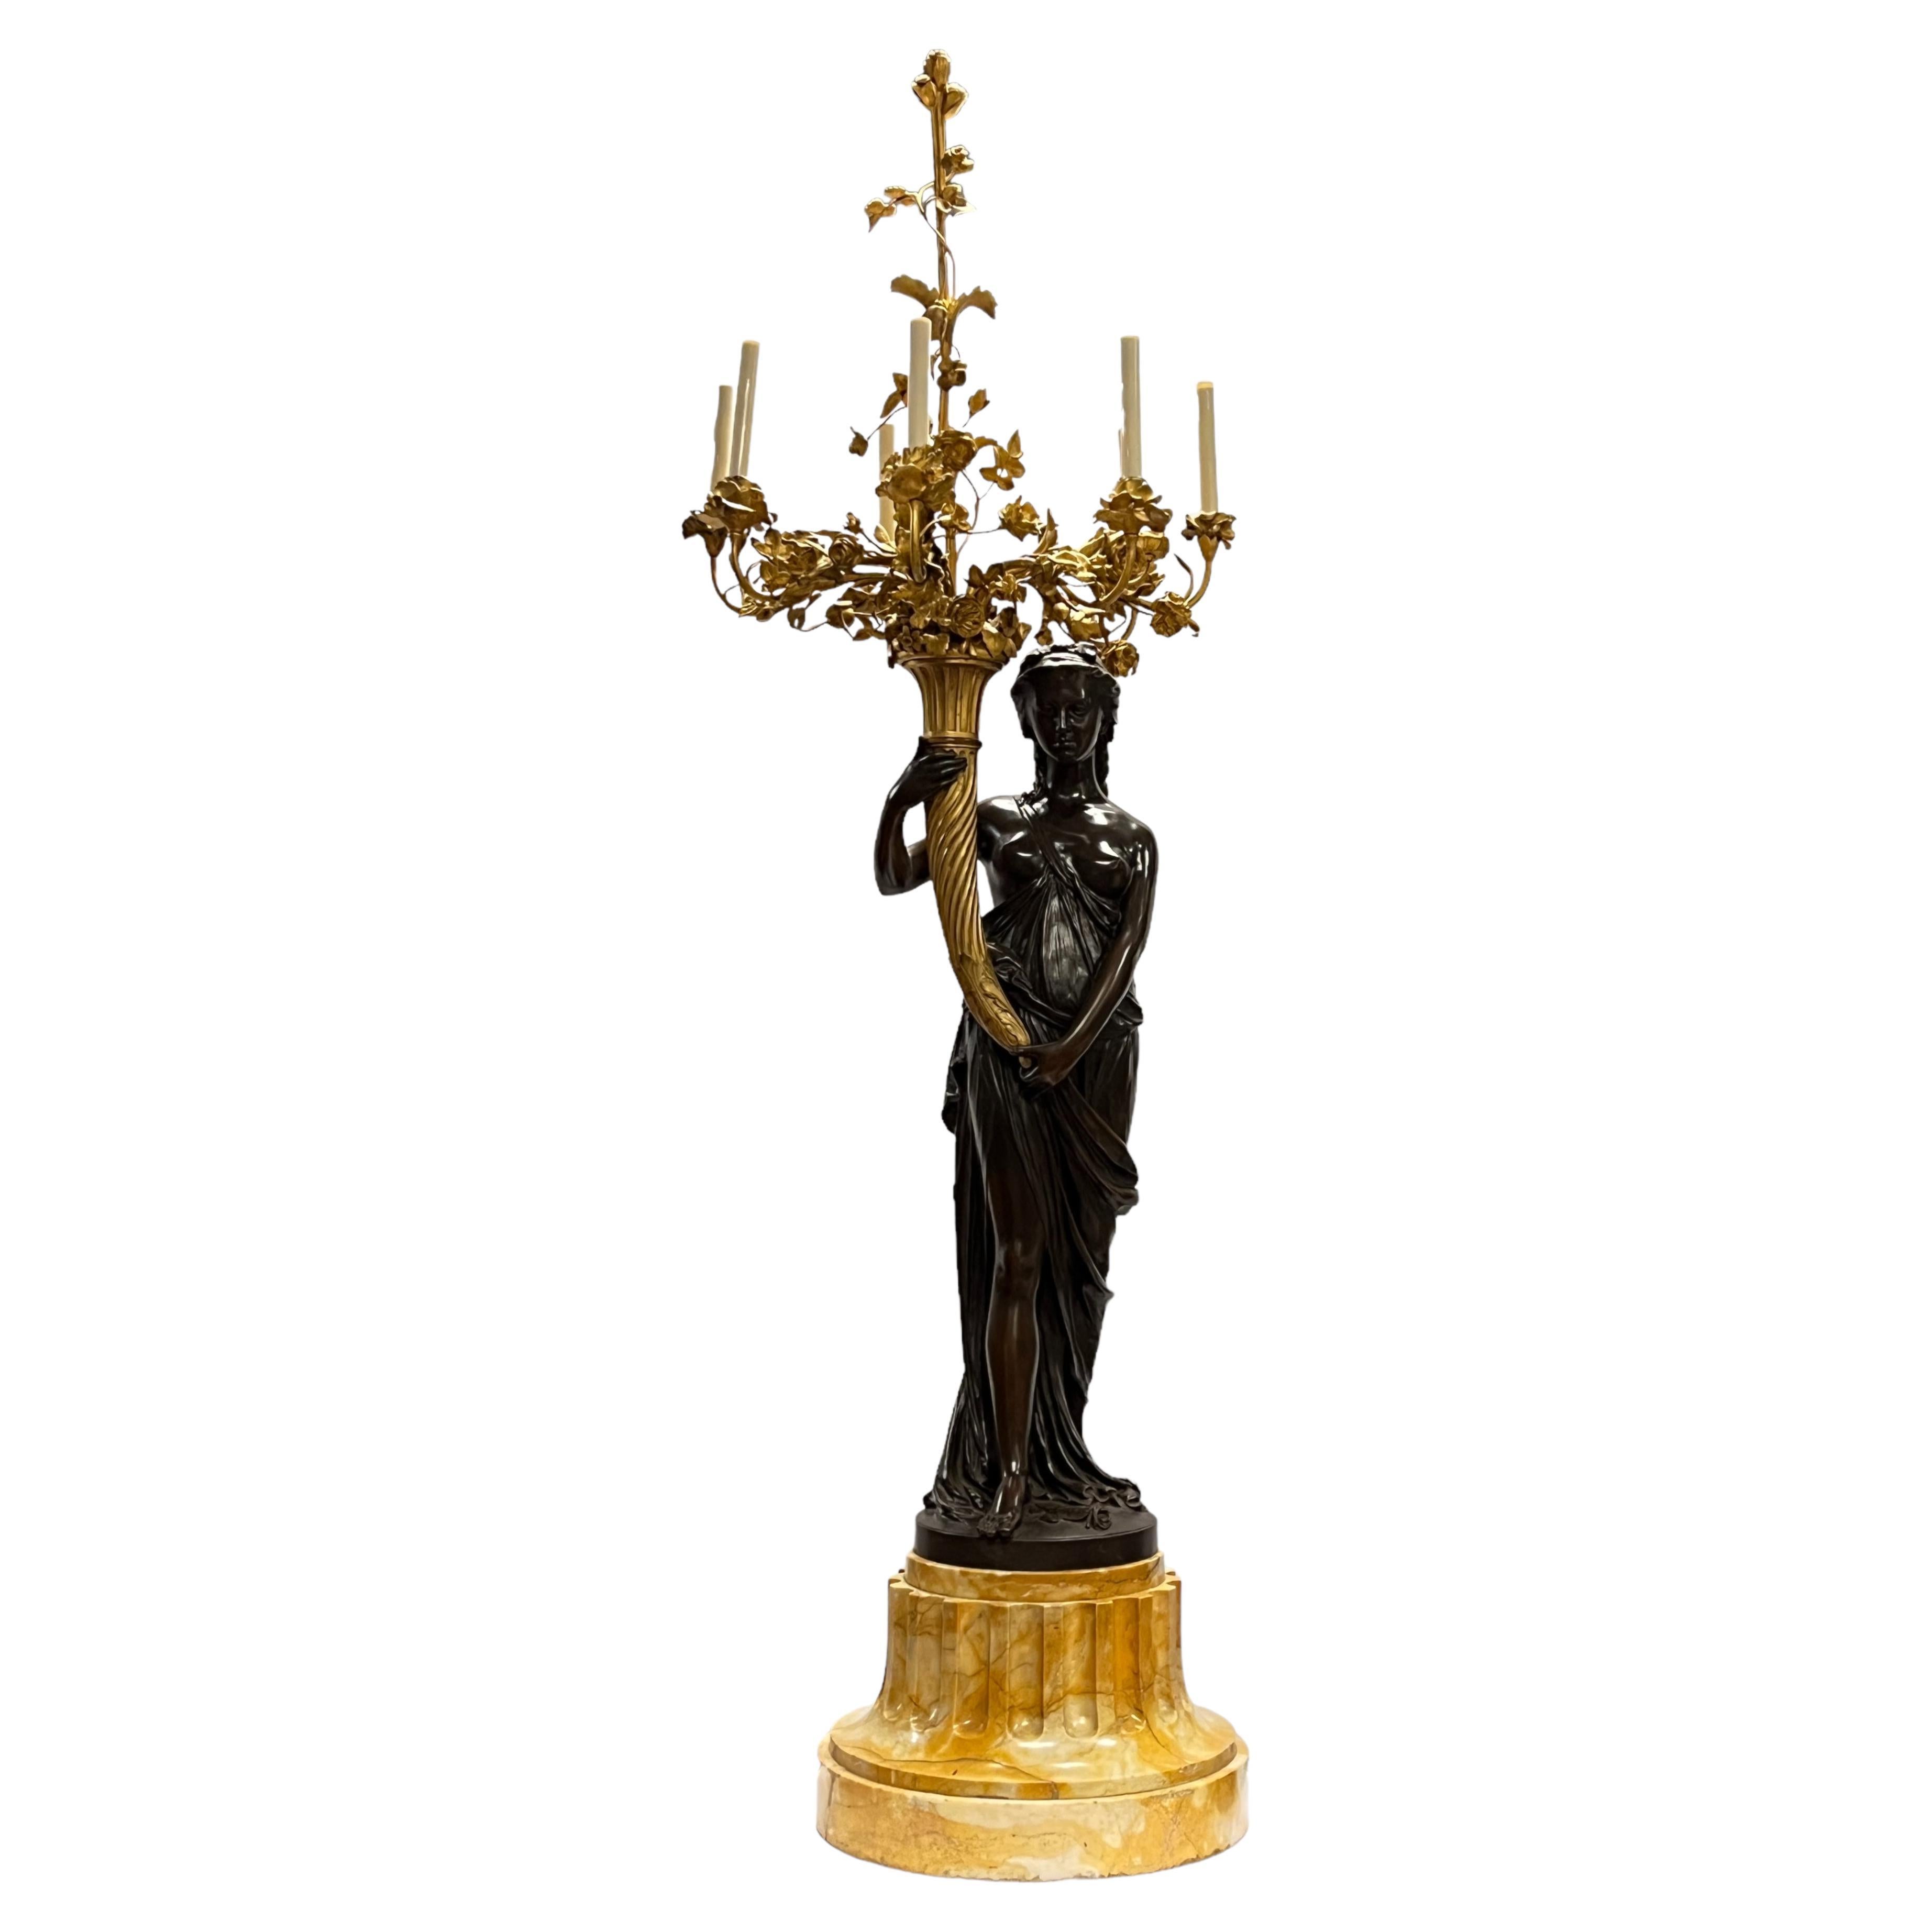 Very fine 19 century French Neoclassical Figurative Bronze Torchiere Floor Lamp 